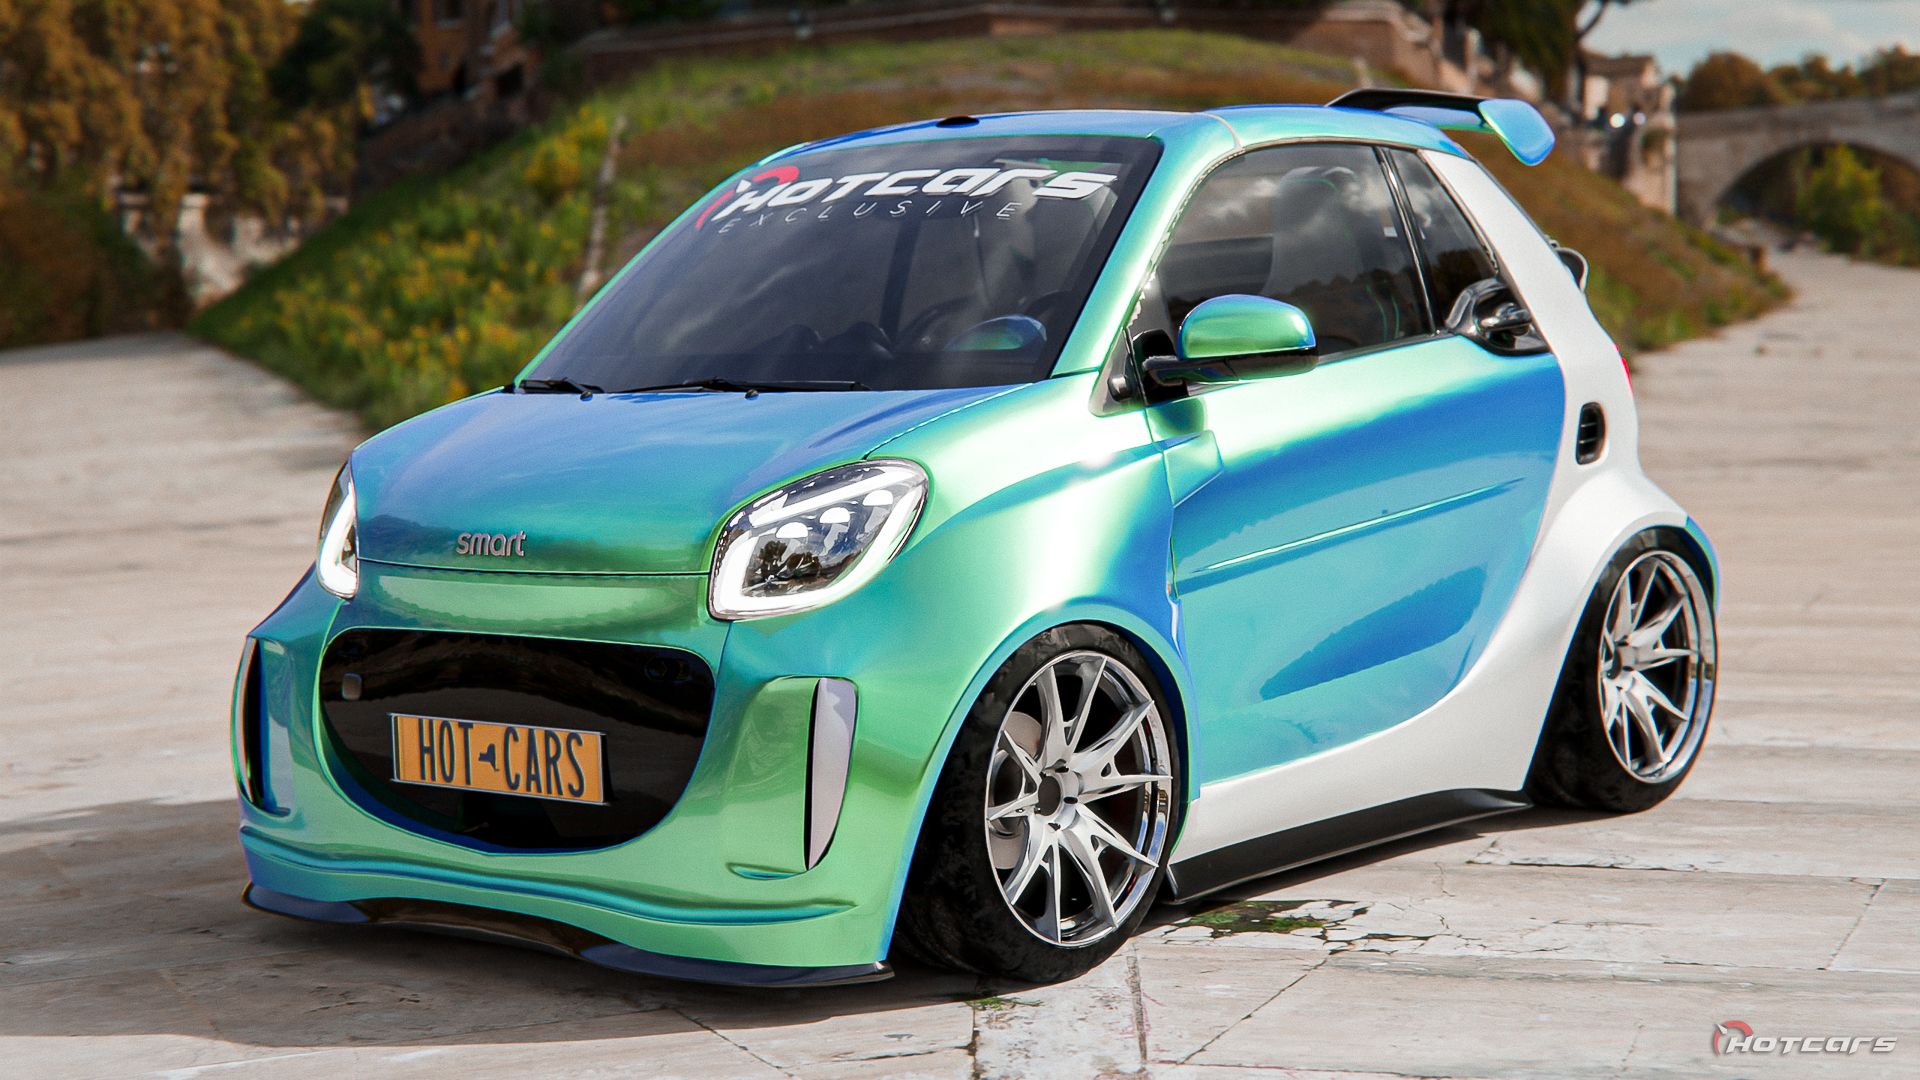 HotCars Car Renders Smart fortwo, front quarter view